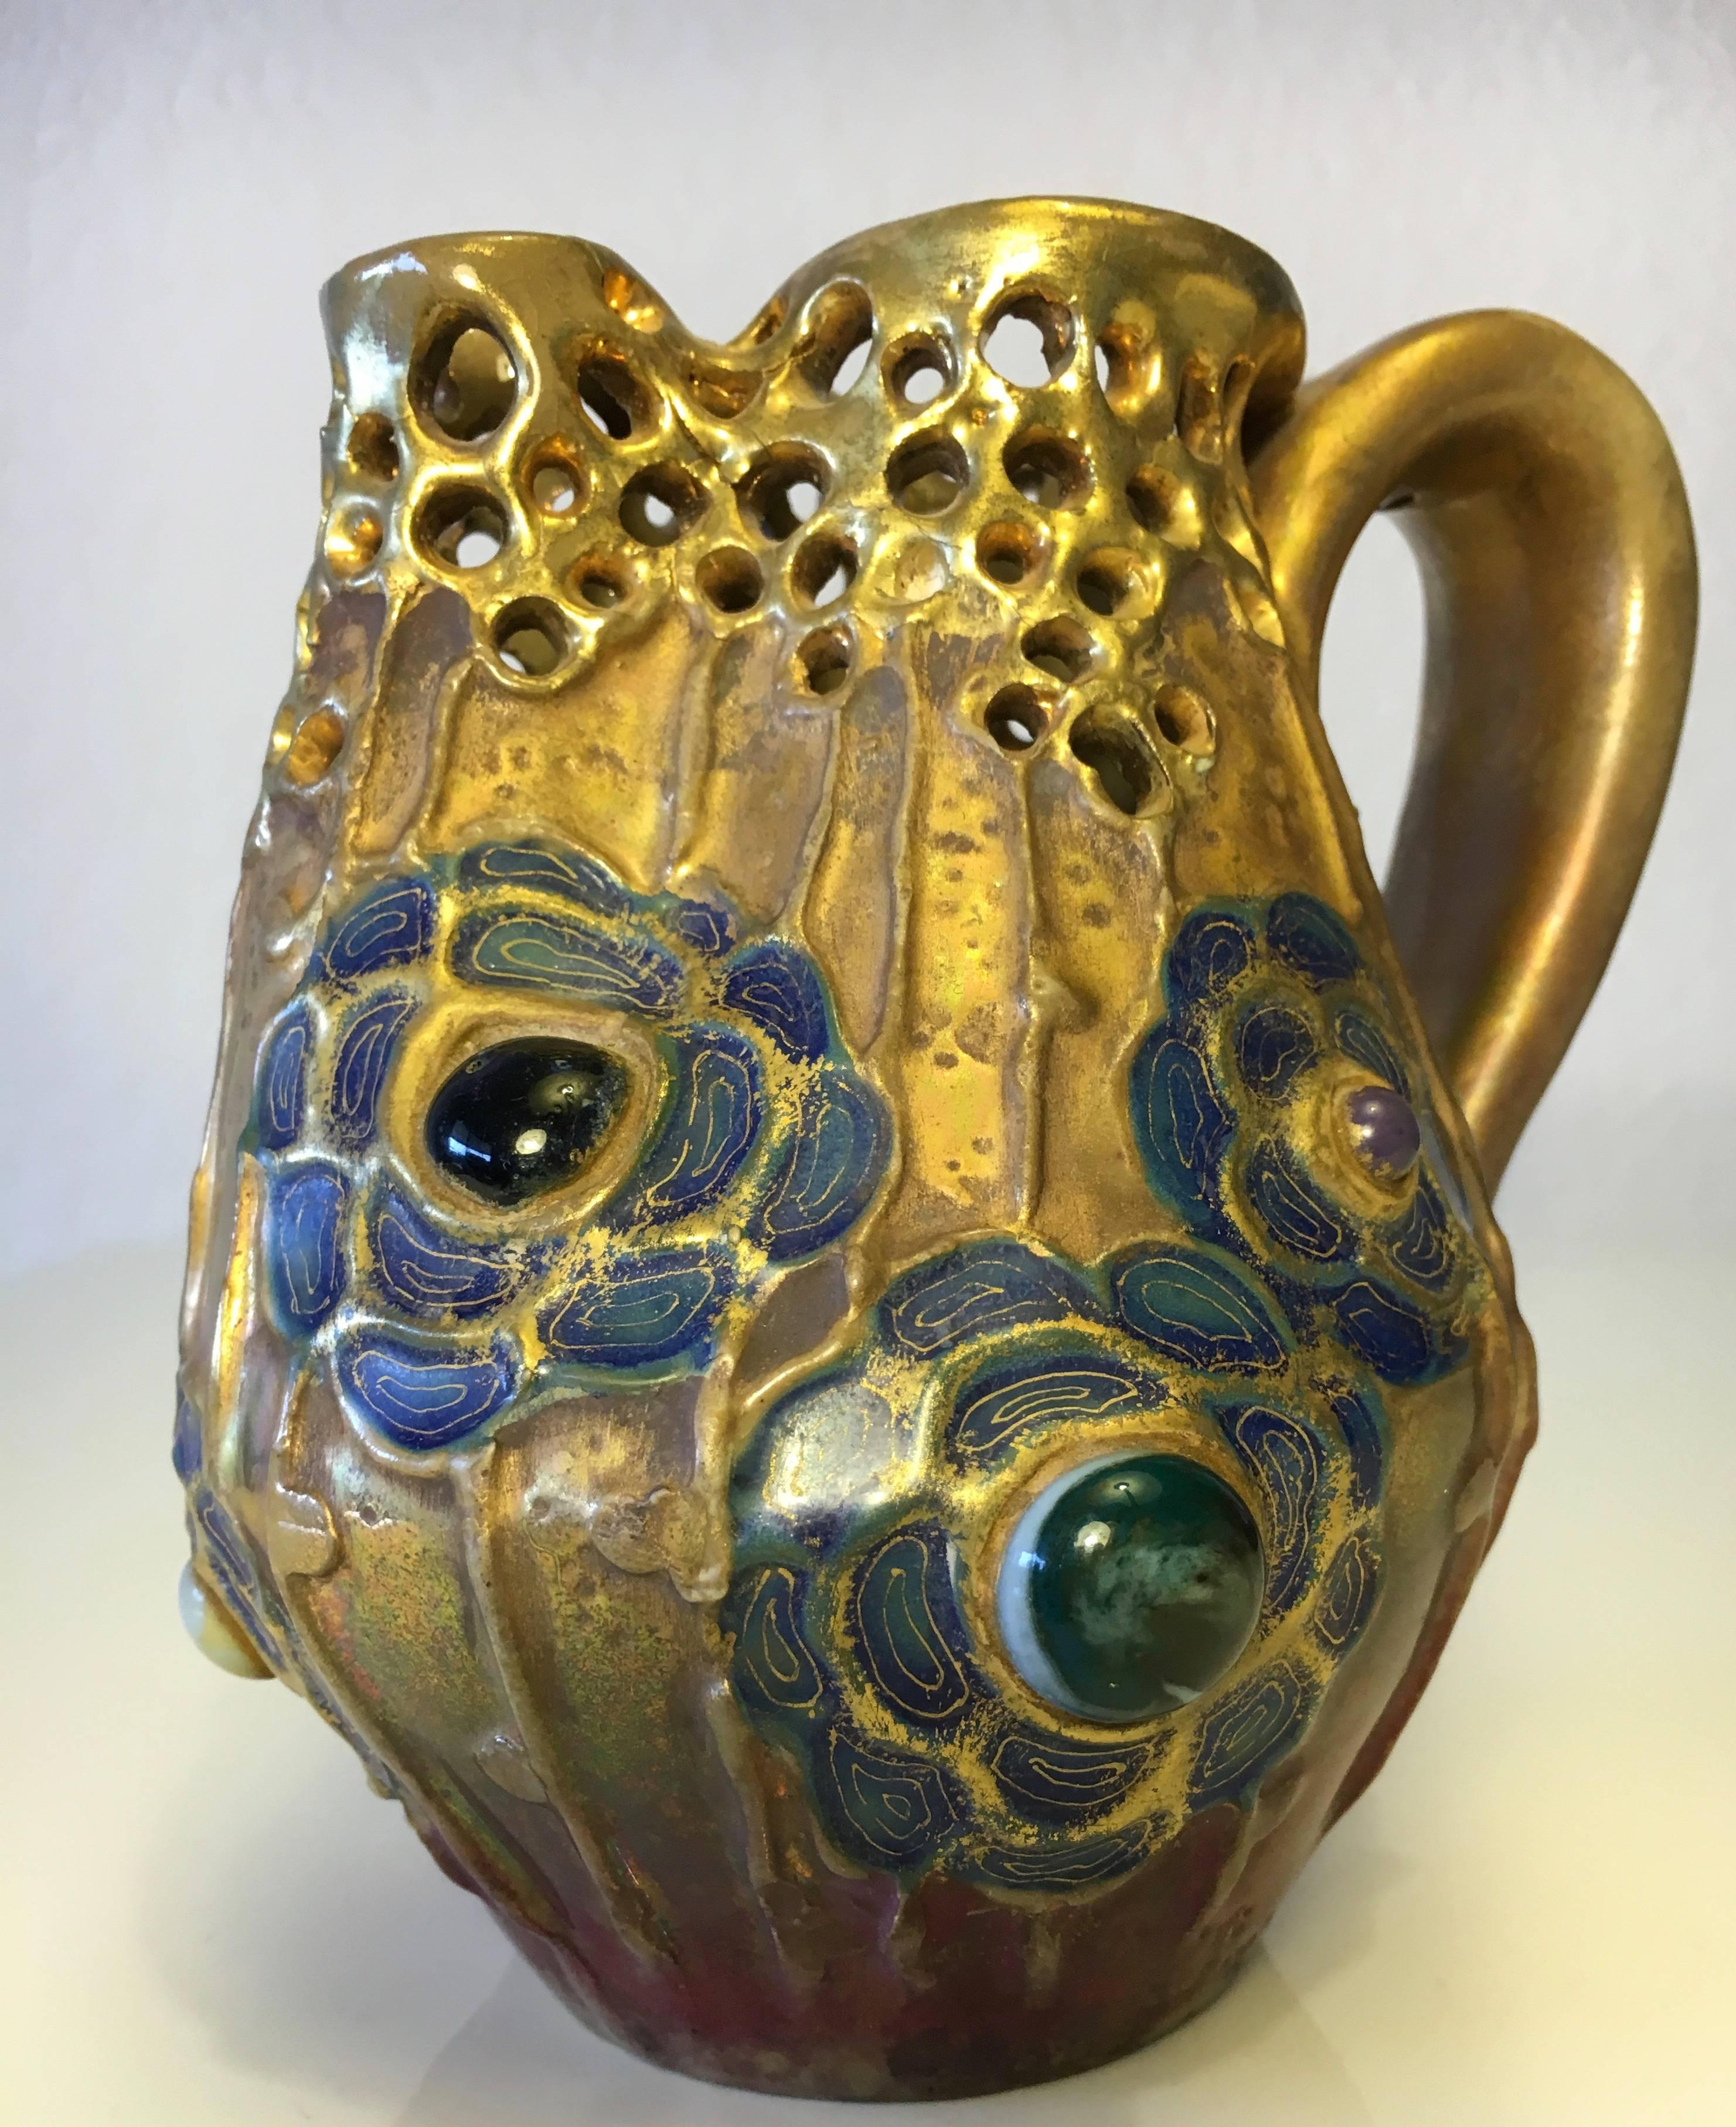 Riessner & Kessel small pitcher, better know as Amphora, a Bohemian ceramics producer, introduced its Gres-Bijou series in 1904, at a moment of consumer fatigue with Art Nouveau movement's focus on floral ornamentation.
This biomorphic series, with